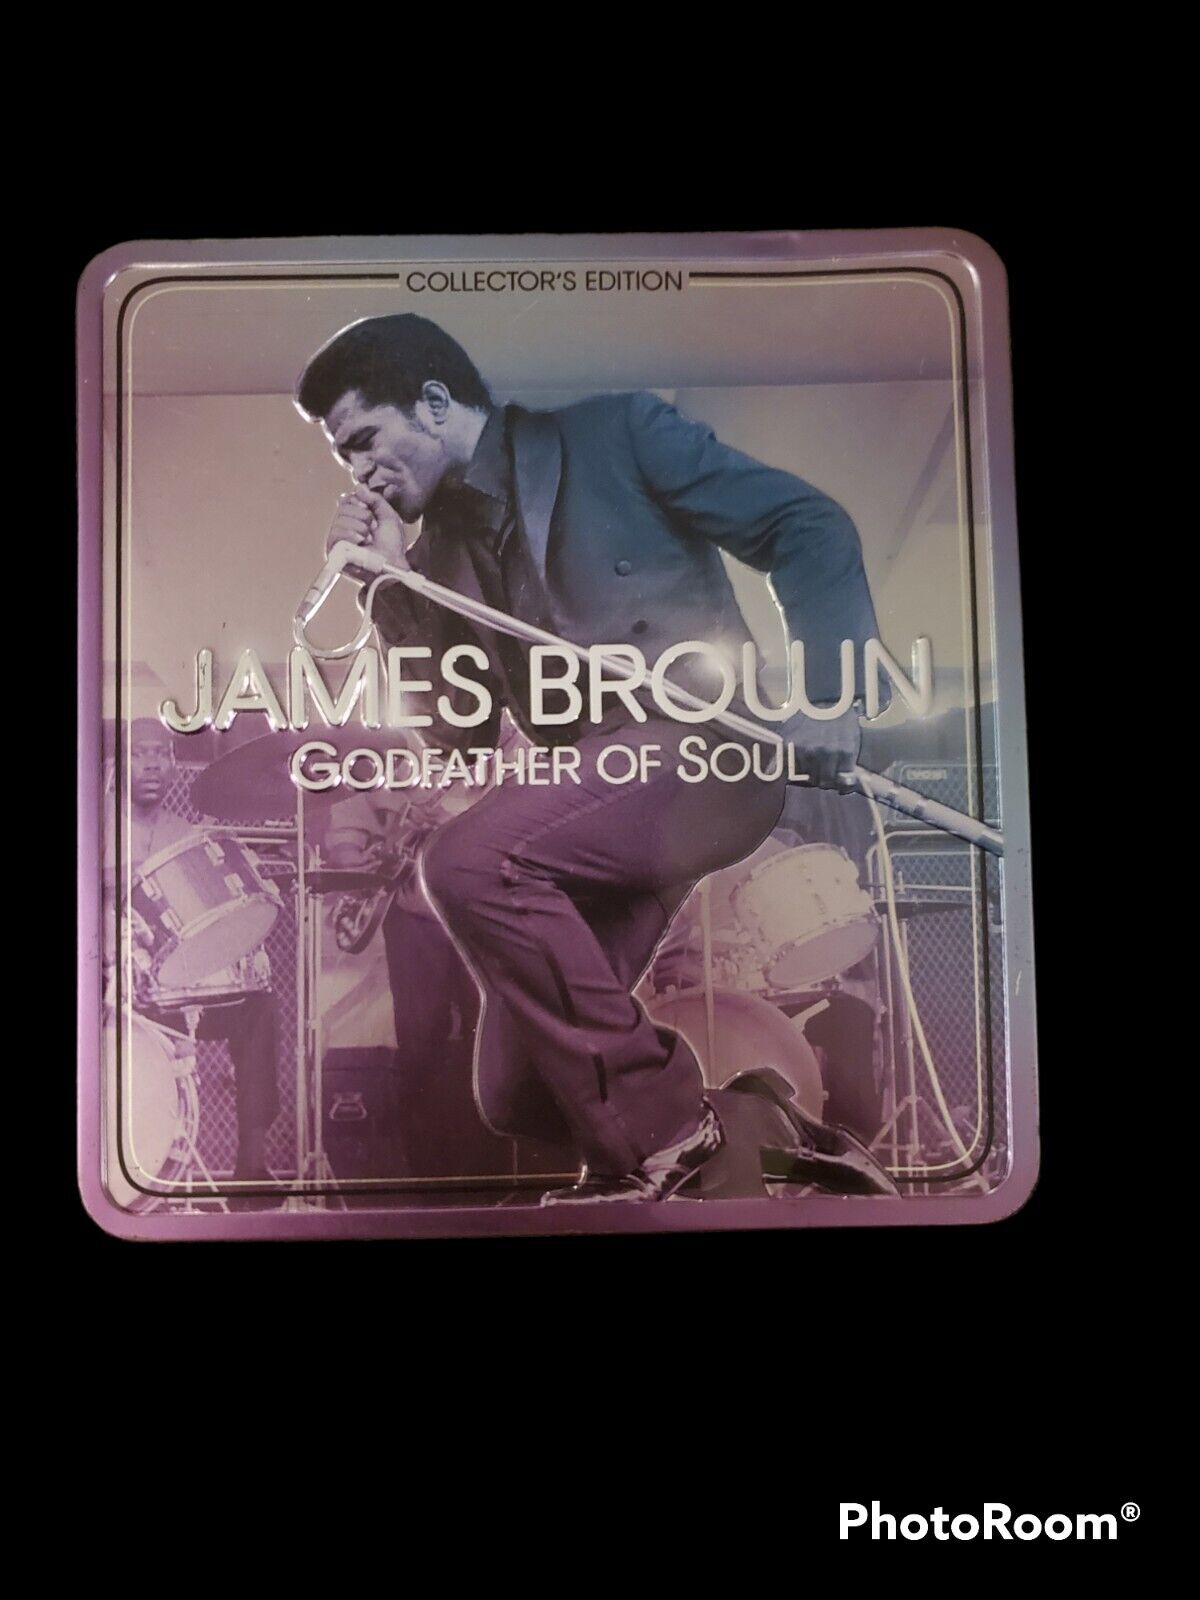 James Brown the godfather of soul CD collection 3 discs, 30 songs 